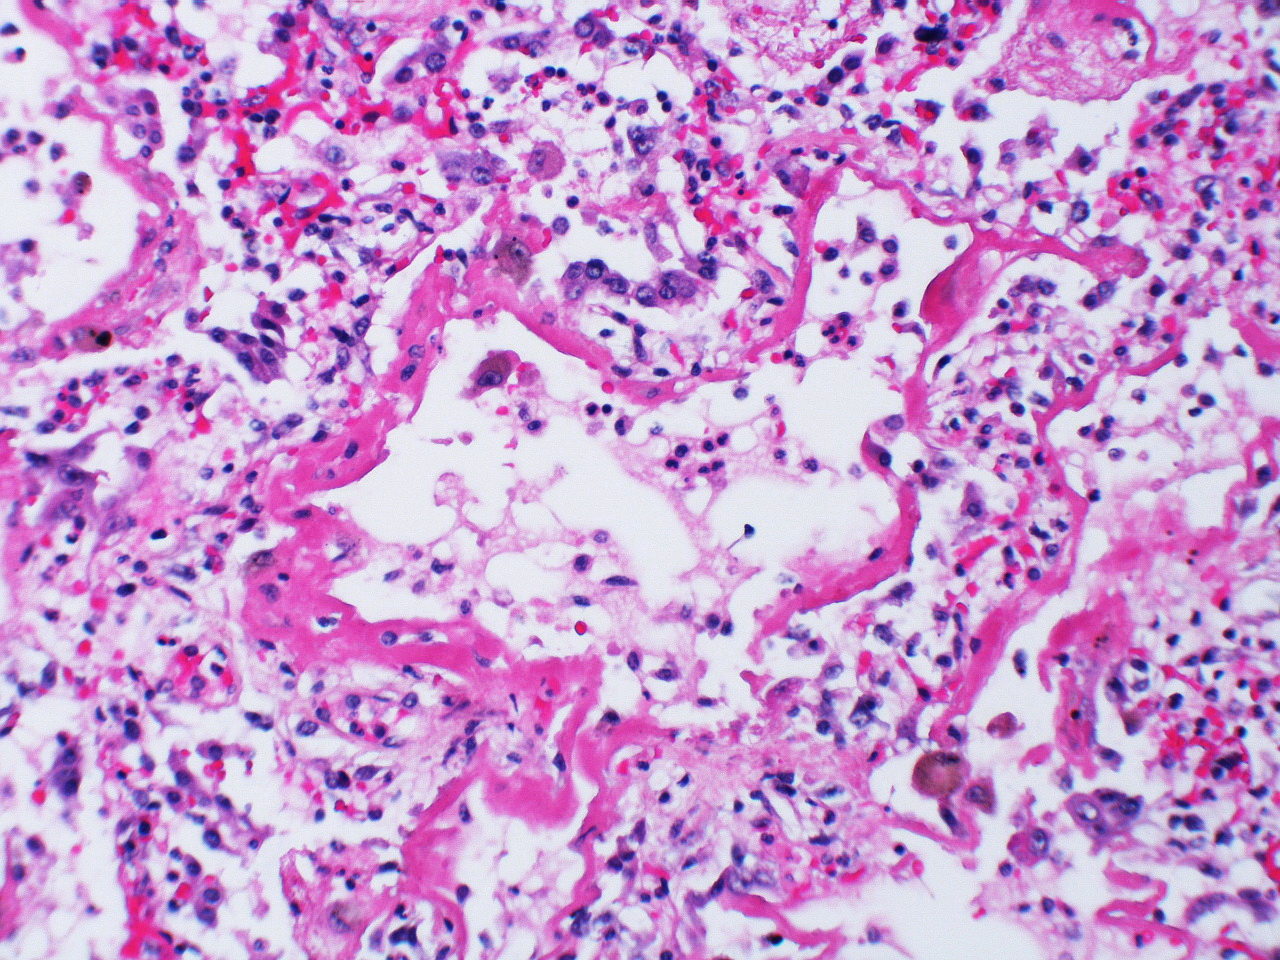 Histological slide of lung tissue showing a single airspace in the center of the image - the alveolar walls are severely thickened. The interstitial tissue shows signs of edema and contains numerous darker dots indicating the presence of fibroblasts.